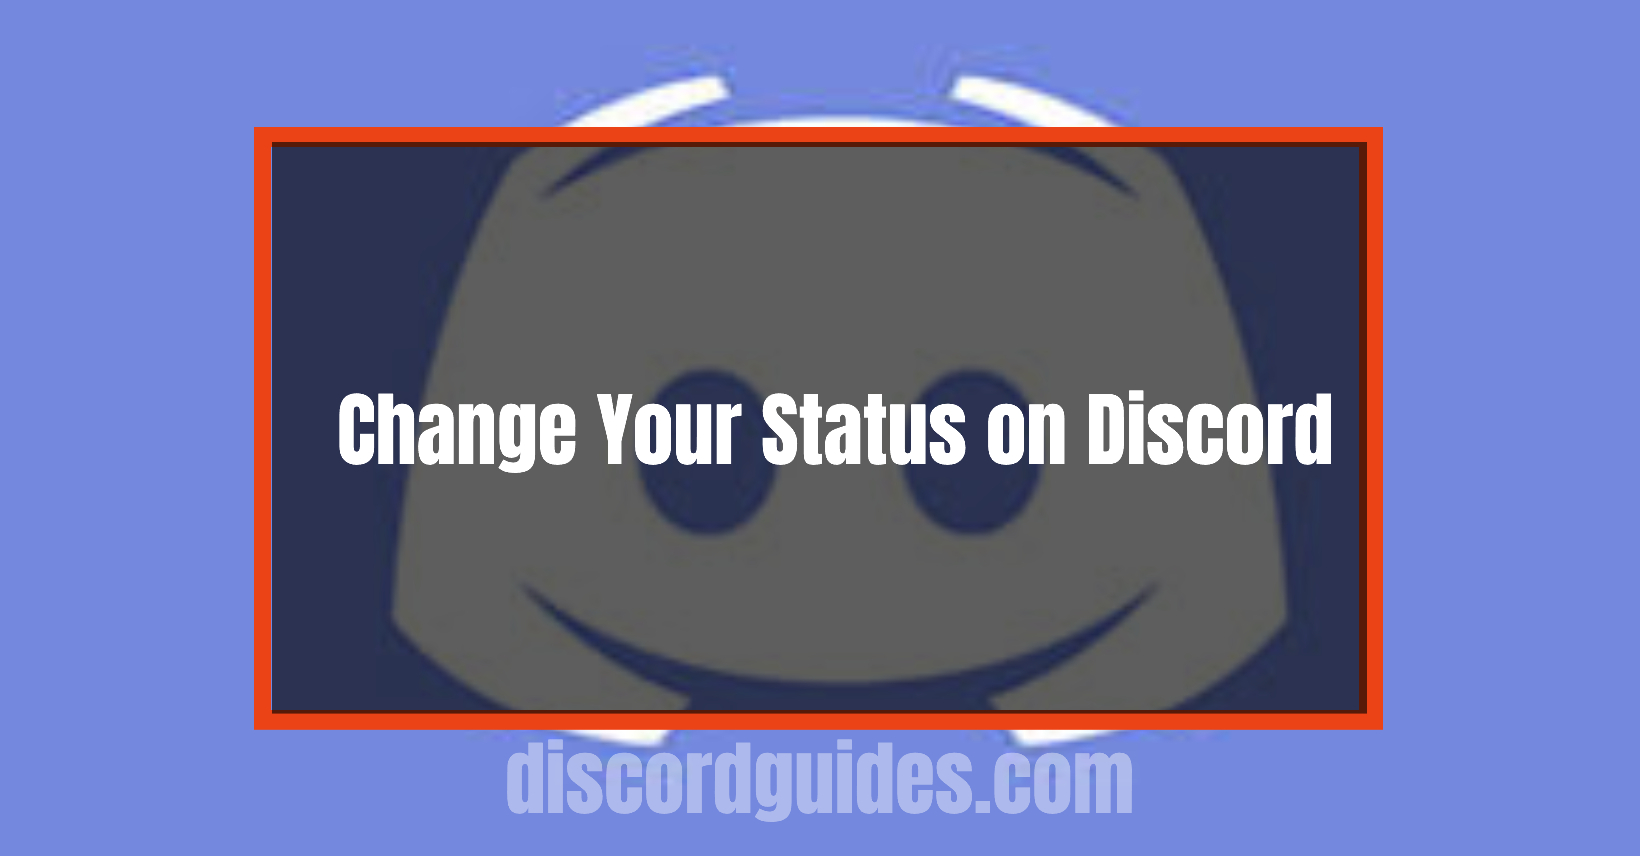 How to Change Your Status on Discord?